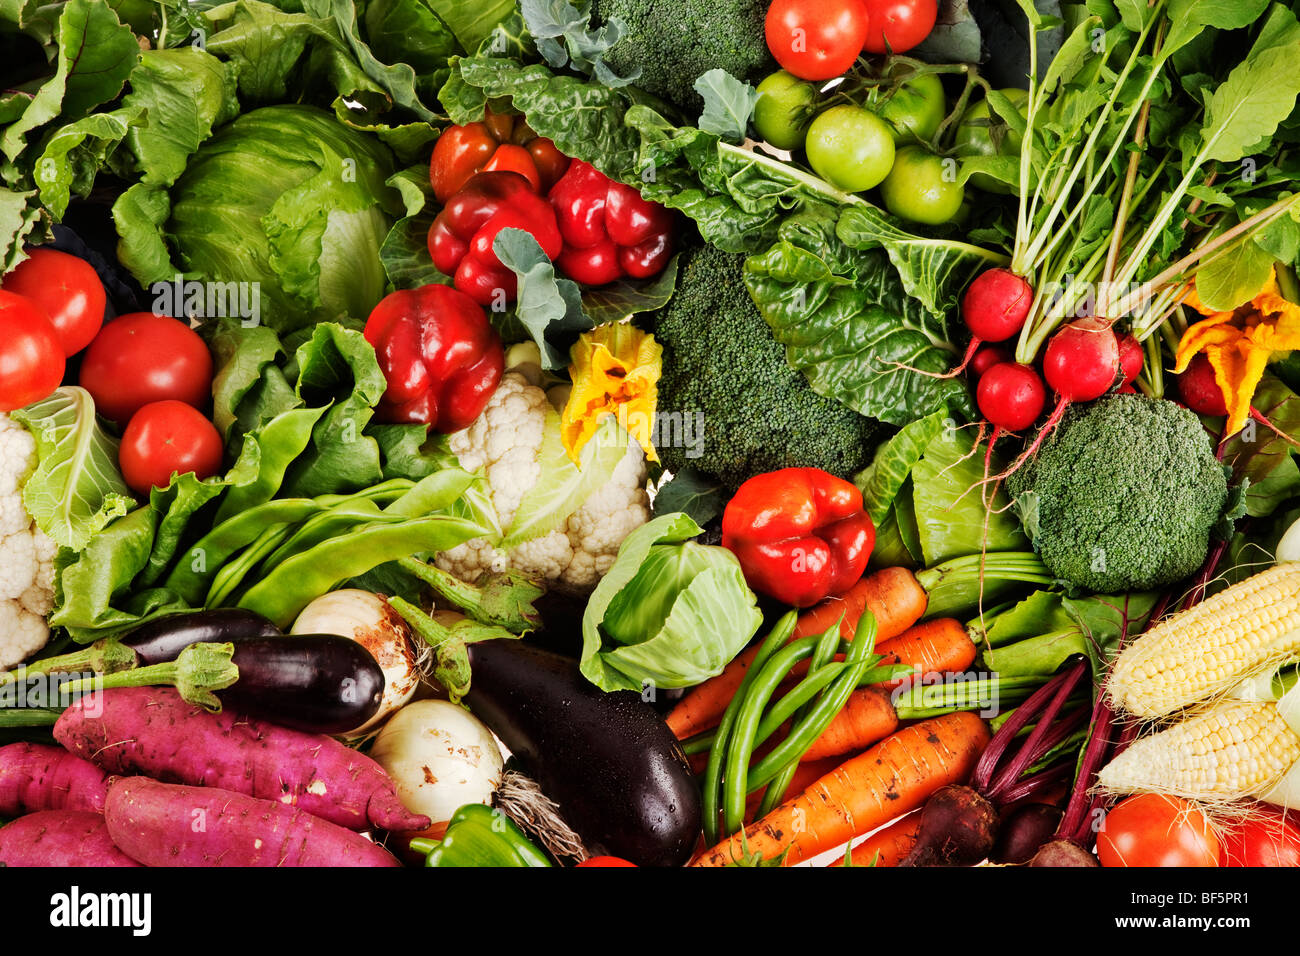 Bunch of fresh organic vegetables harvested from the garden Stock Photo